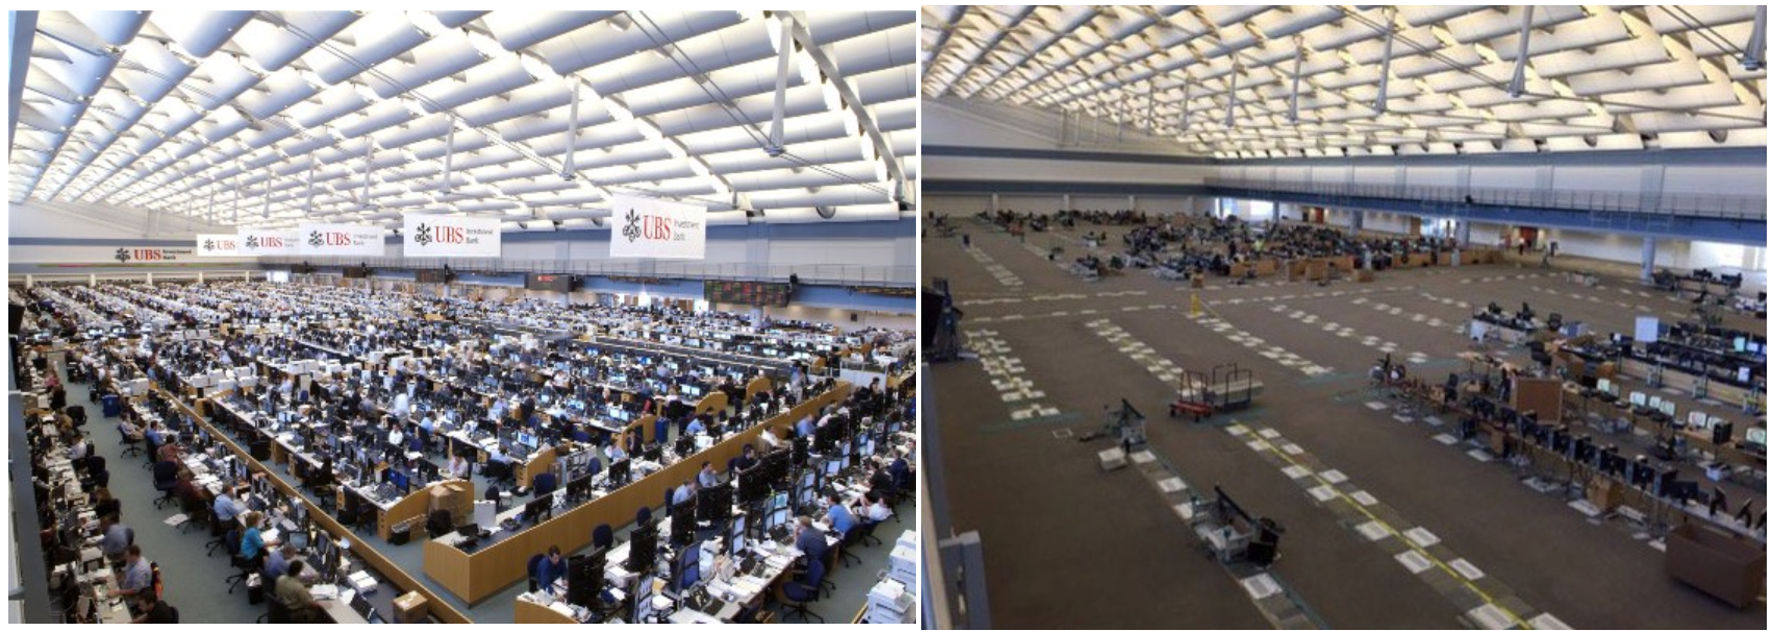 UBS trading floor in 2008 vs 2016. Financial crisis plus automation. Source: AtozMarkets